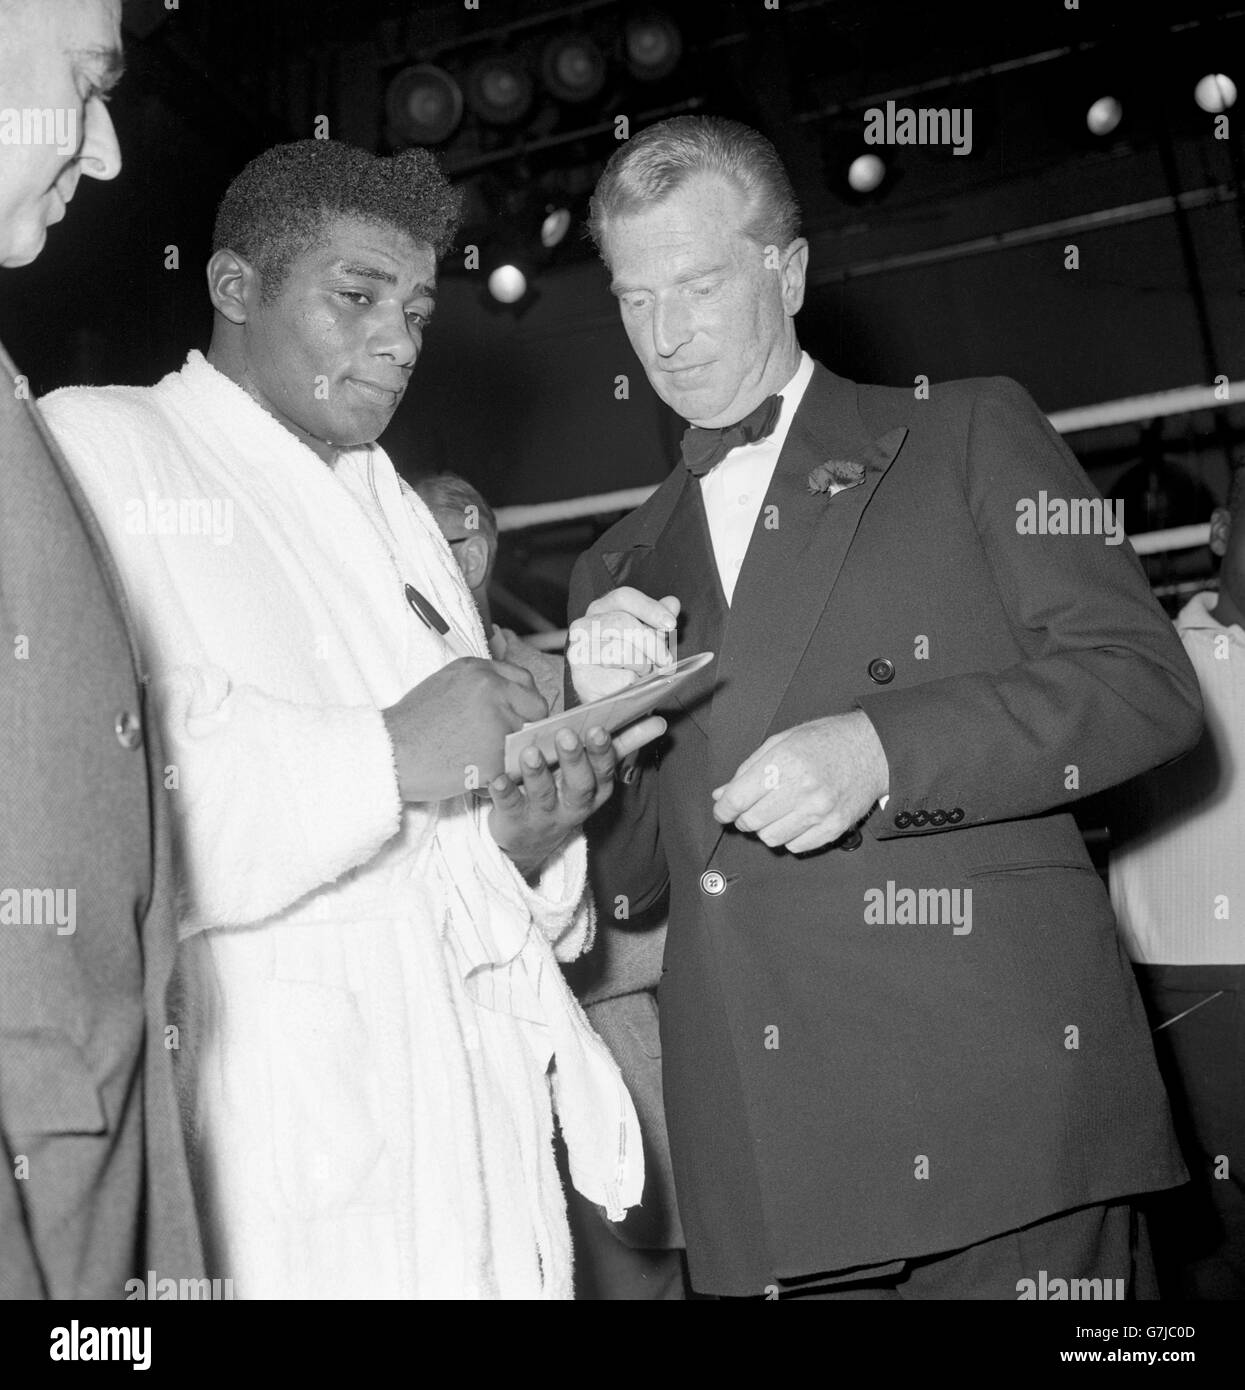 World Heavyweight Champion Floyd Patterson from America signs his autograph for the man who has just interviewed him, John Freeman (r). The boxer had just gave an exhibition bout in addition to the interview. Stock Photo